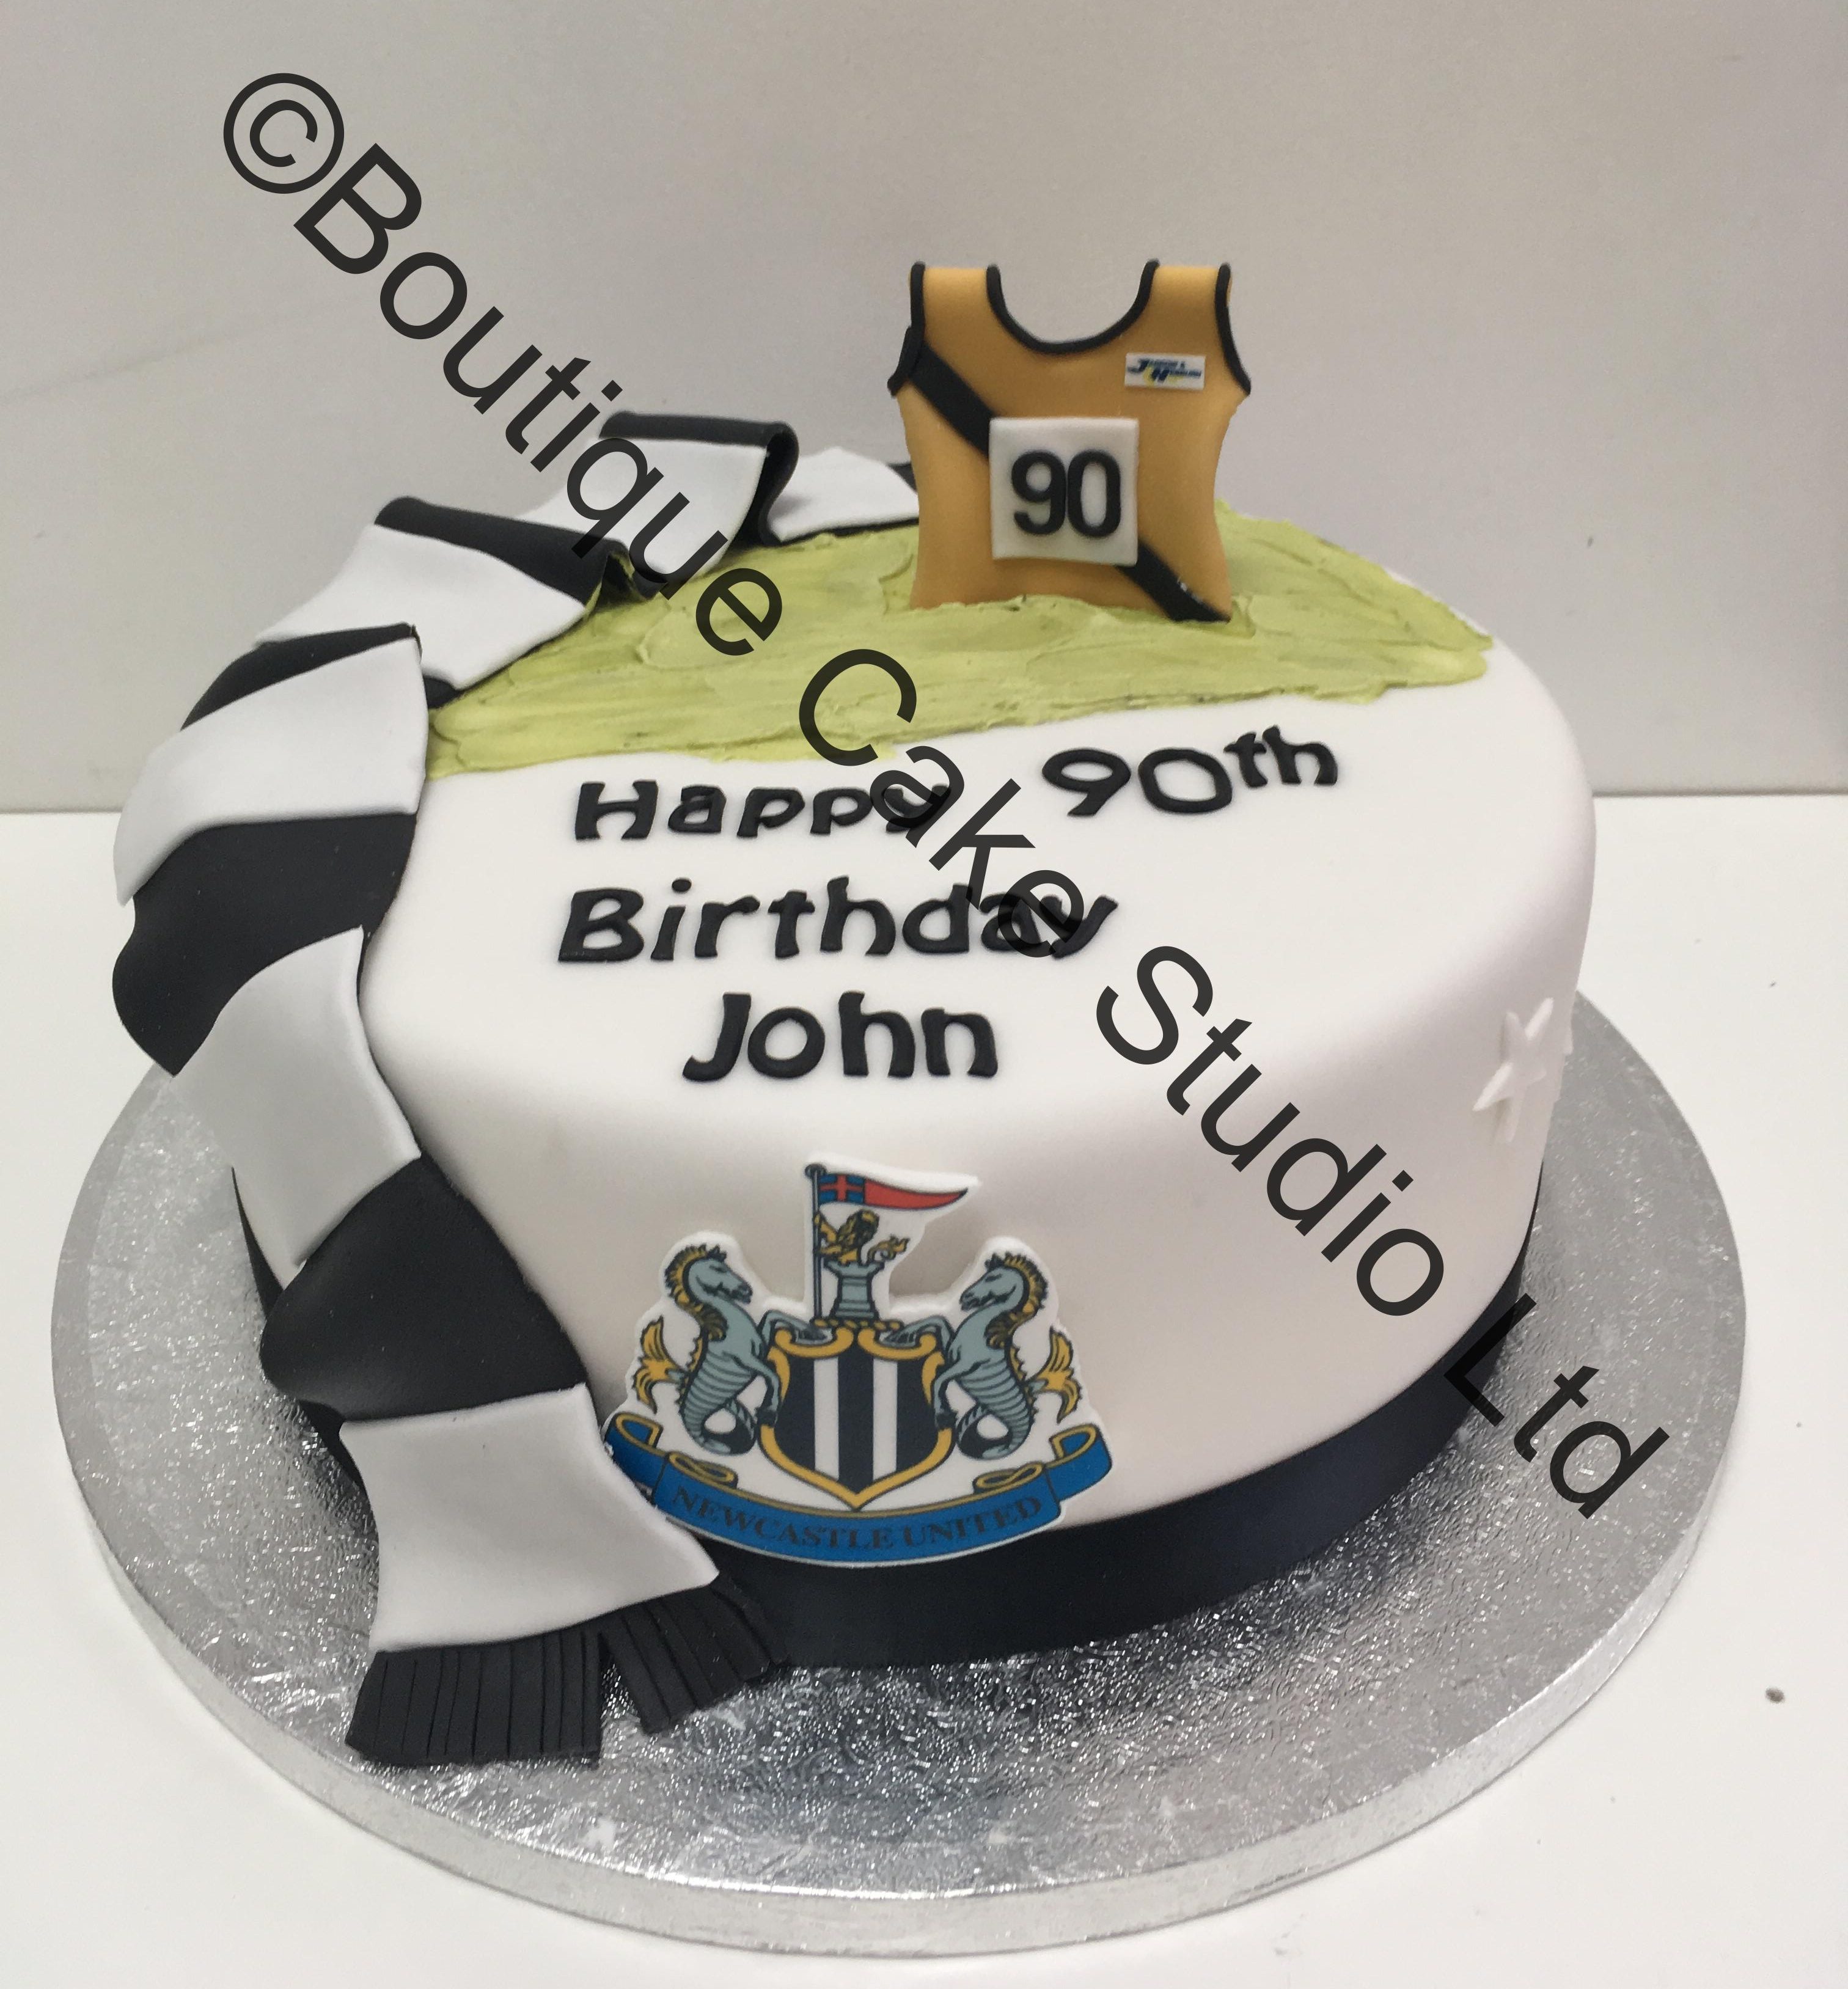 Football and Running themed Cake